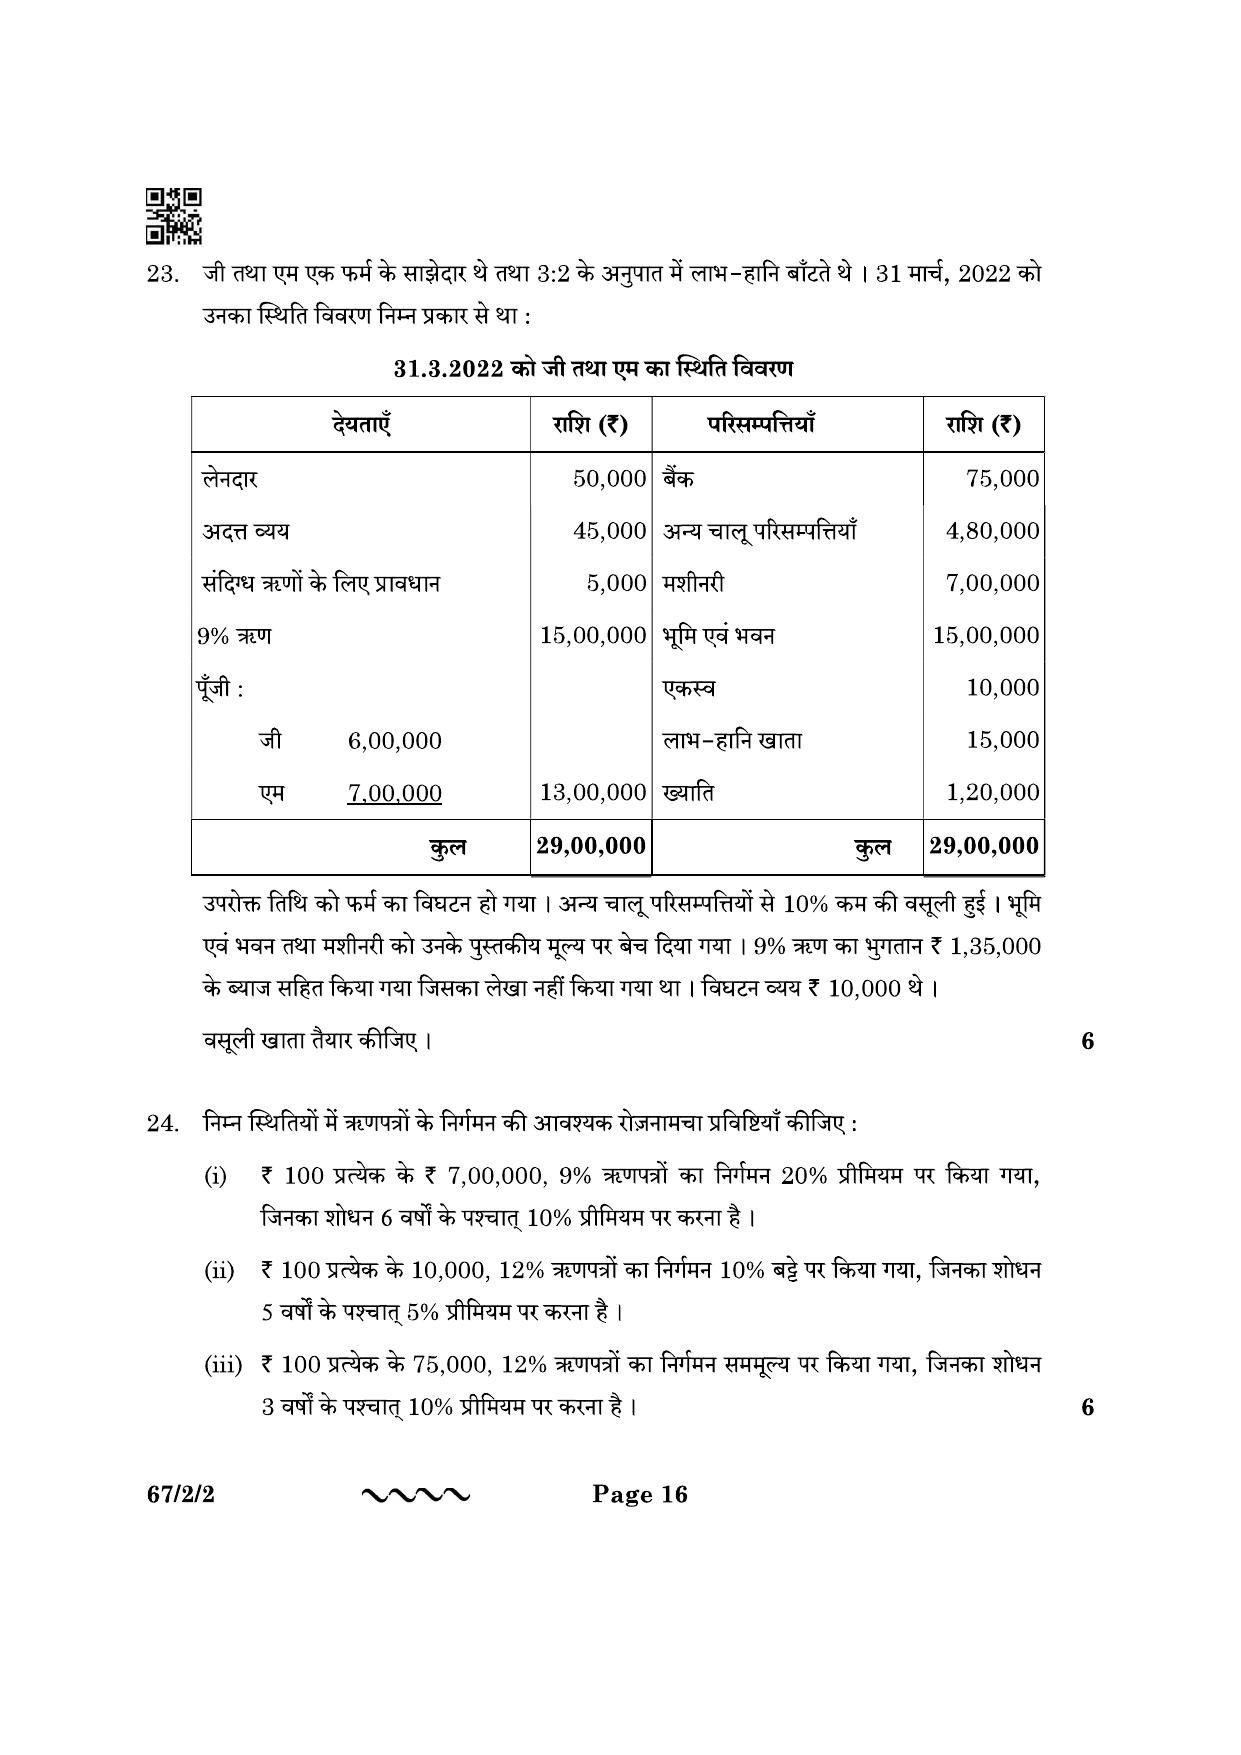 CBSE Class 12 67-2-2 Accountancy 2023 Question Paper - Page 16